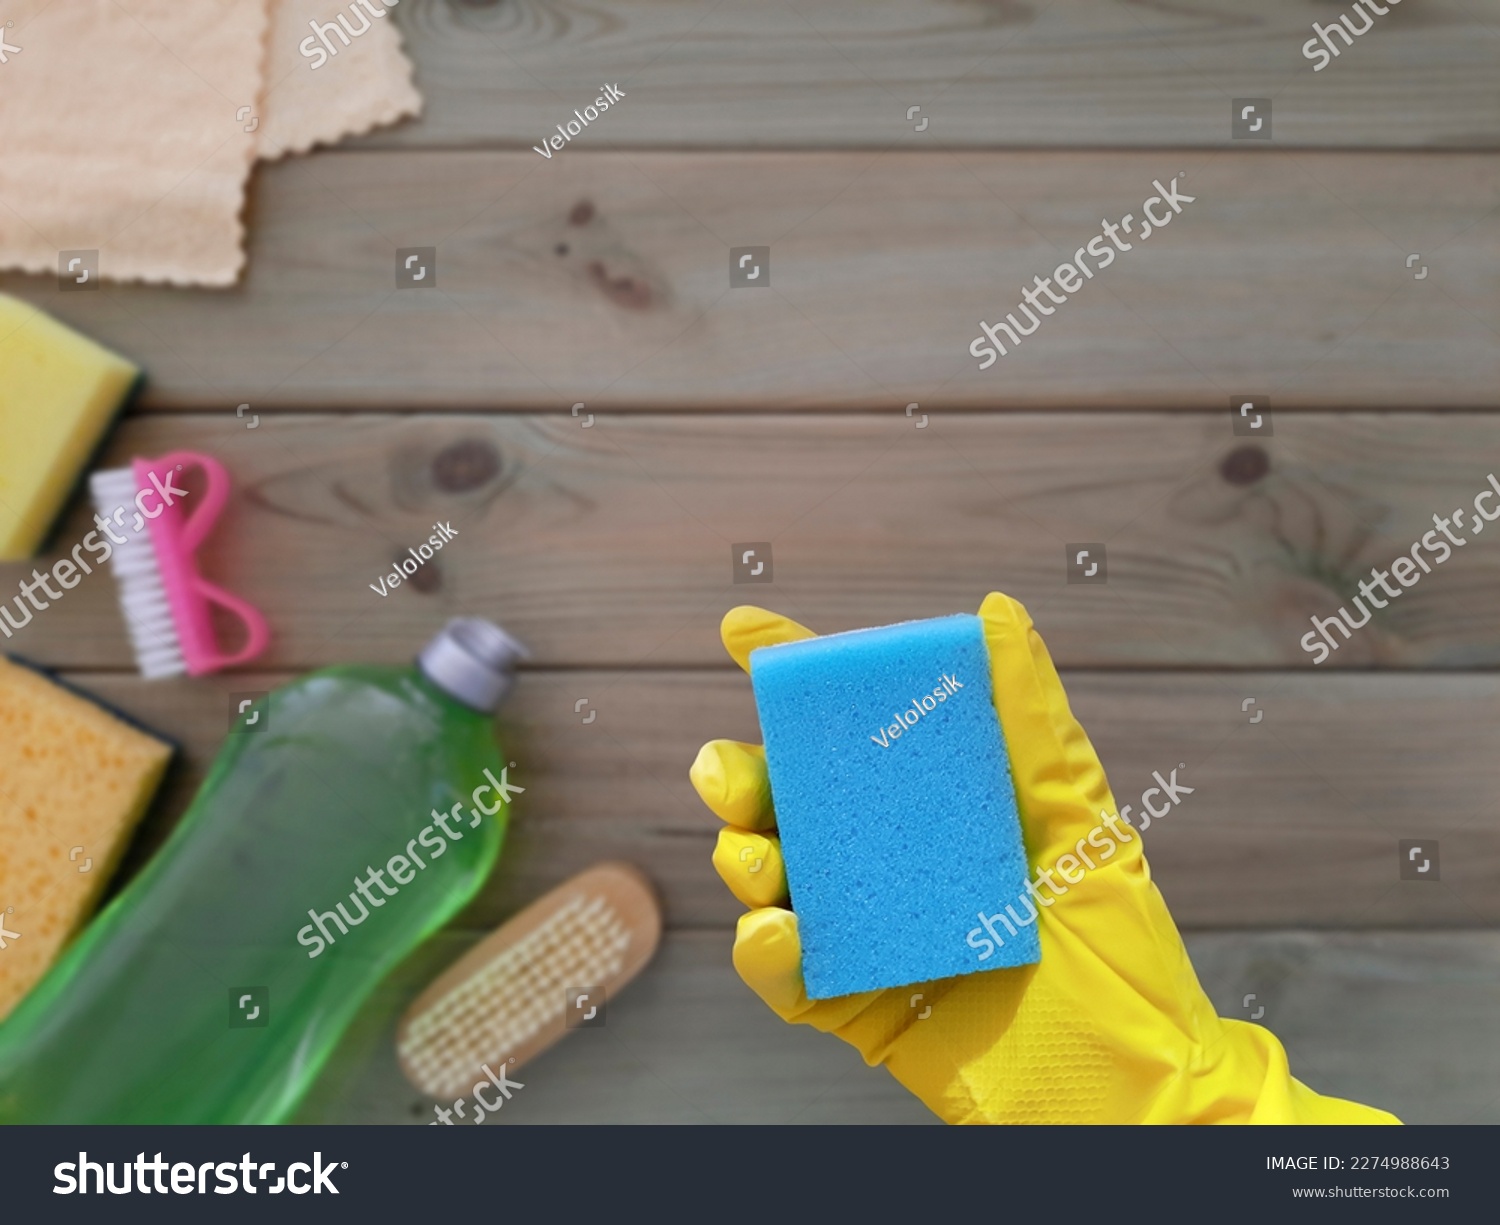 Kitchen sponge in hand. Flat lay. Concept of spring Deep clean of house. Place for text.  Rubber glove with washcloth on blurred background of wooden table with cleaning tools. Copy space. Top view. #2274988643